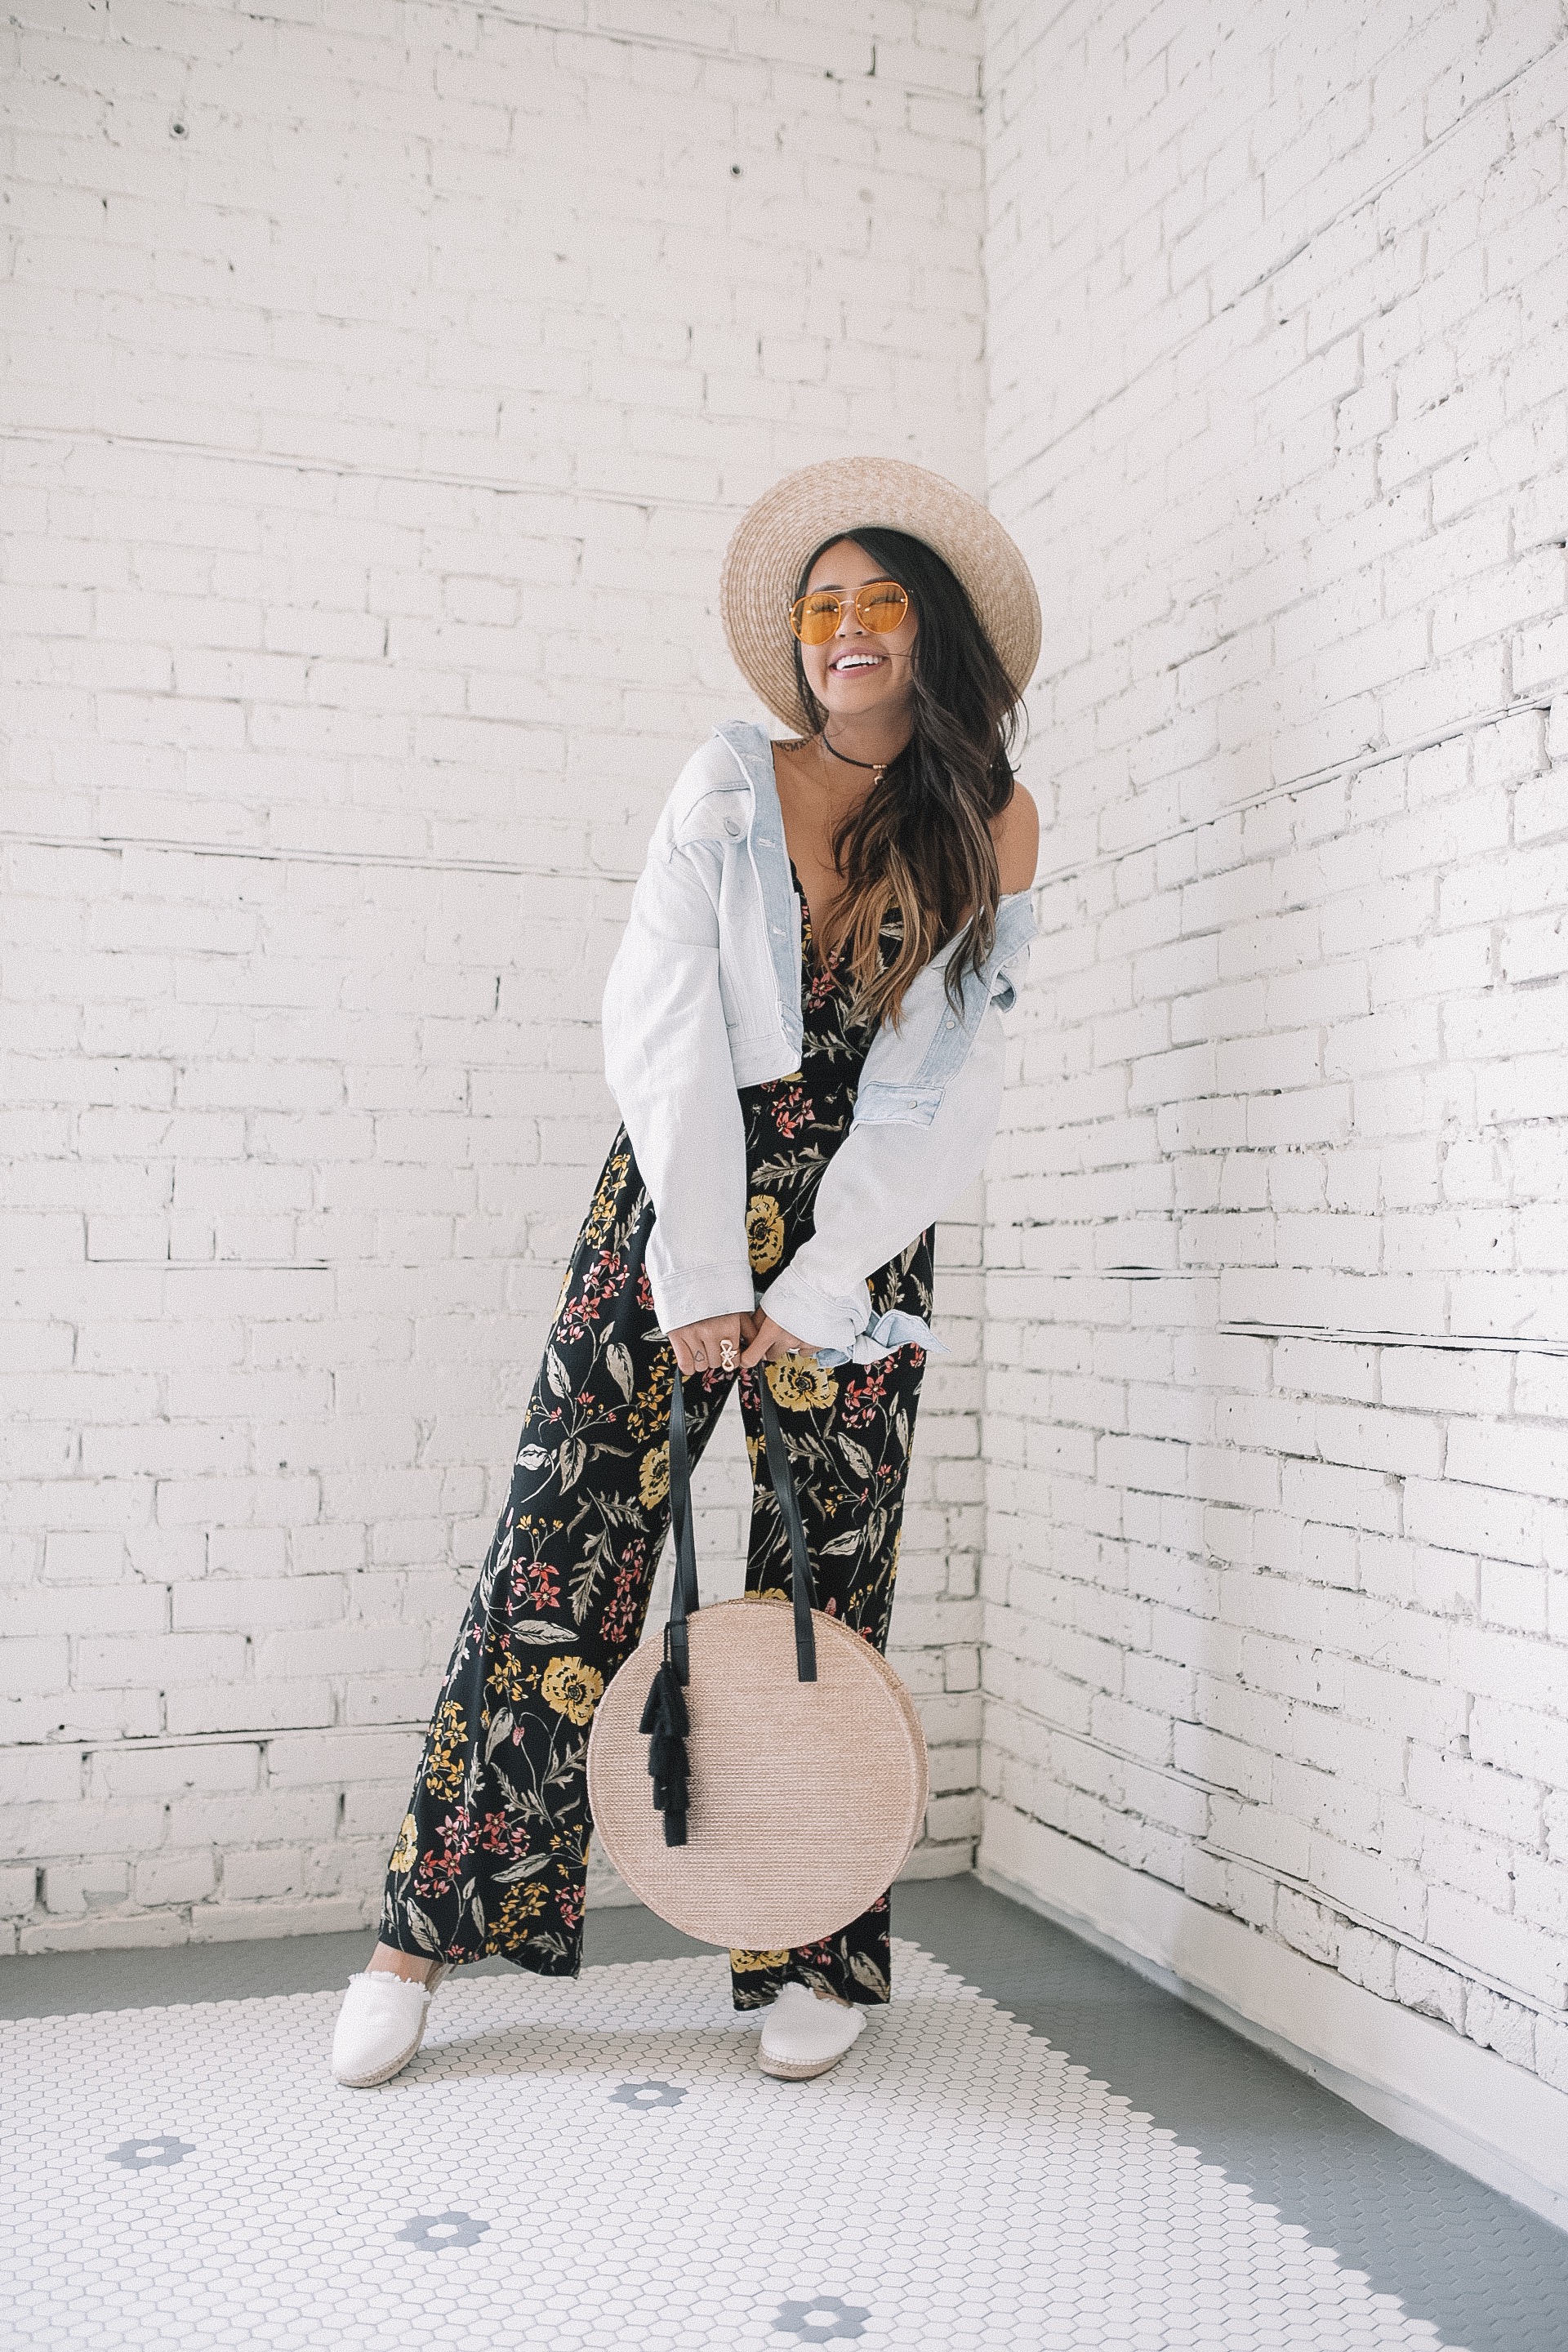 The Edit x Express Floral Spring Trend Gypsy Tan